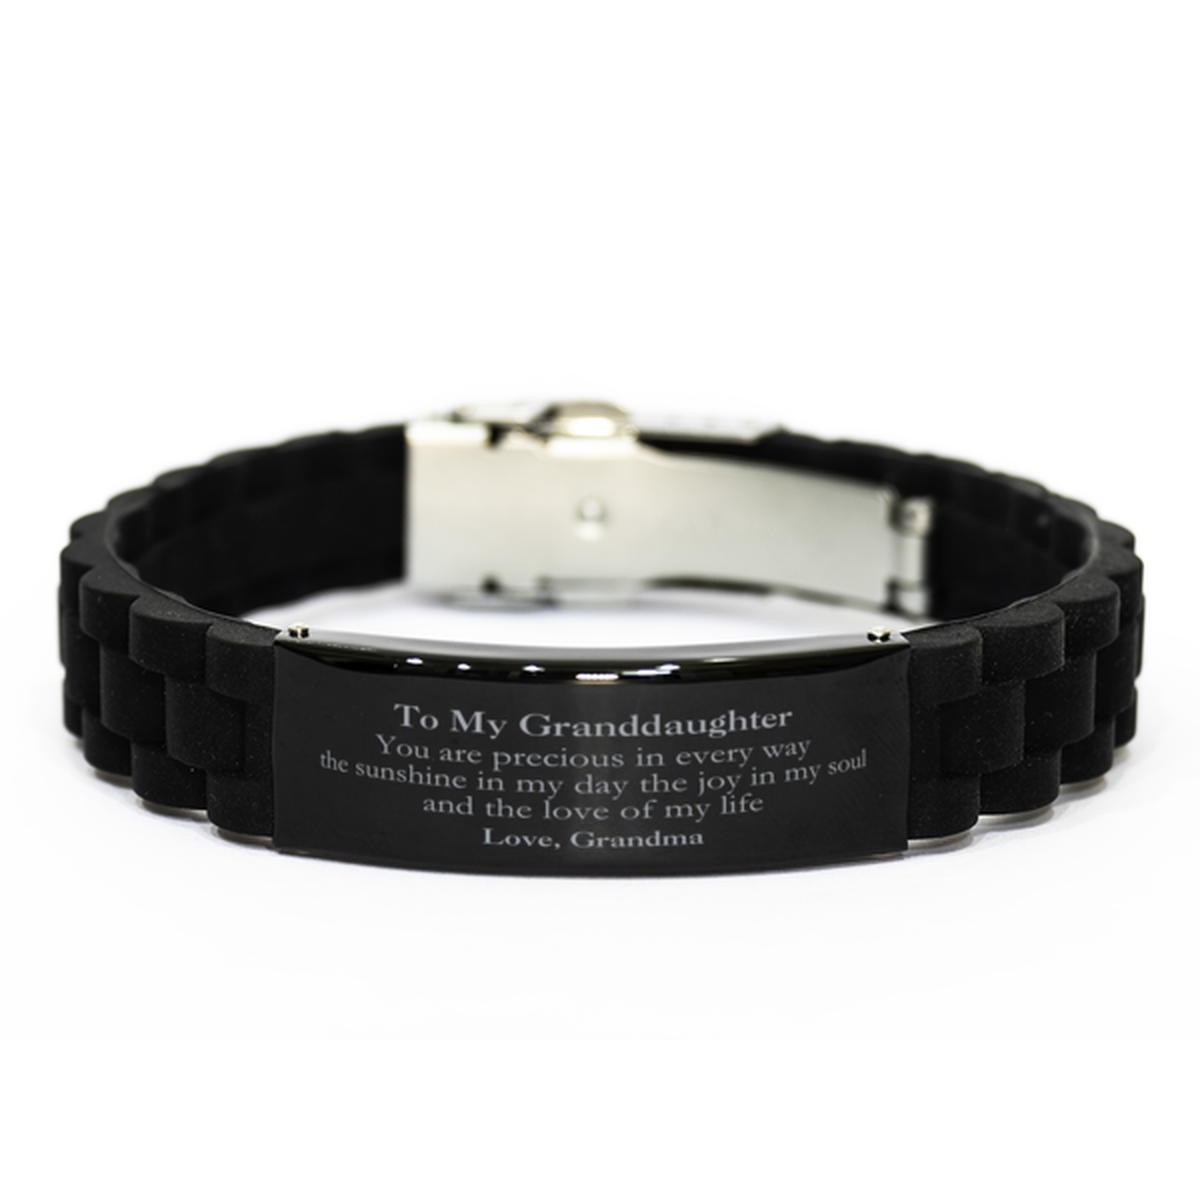 Graduation Gifts for Granddaughter Black Glidelock Clasp Bracelet Present from Grandma, Christmas Granddaughter Birthday Gifts Granddaughter You are precious in every way the sunshine in my day. Love, Grandma